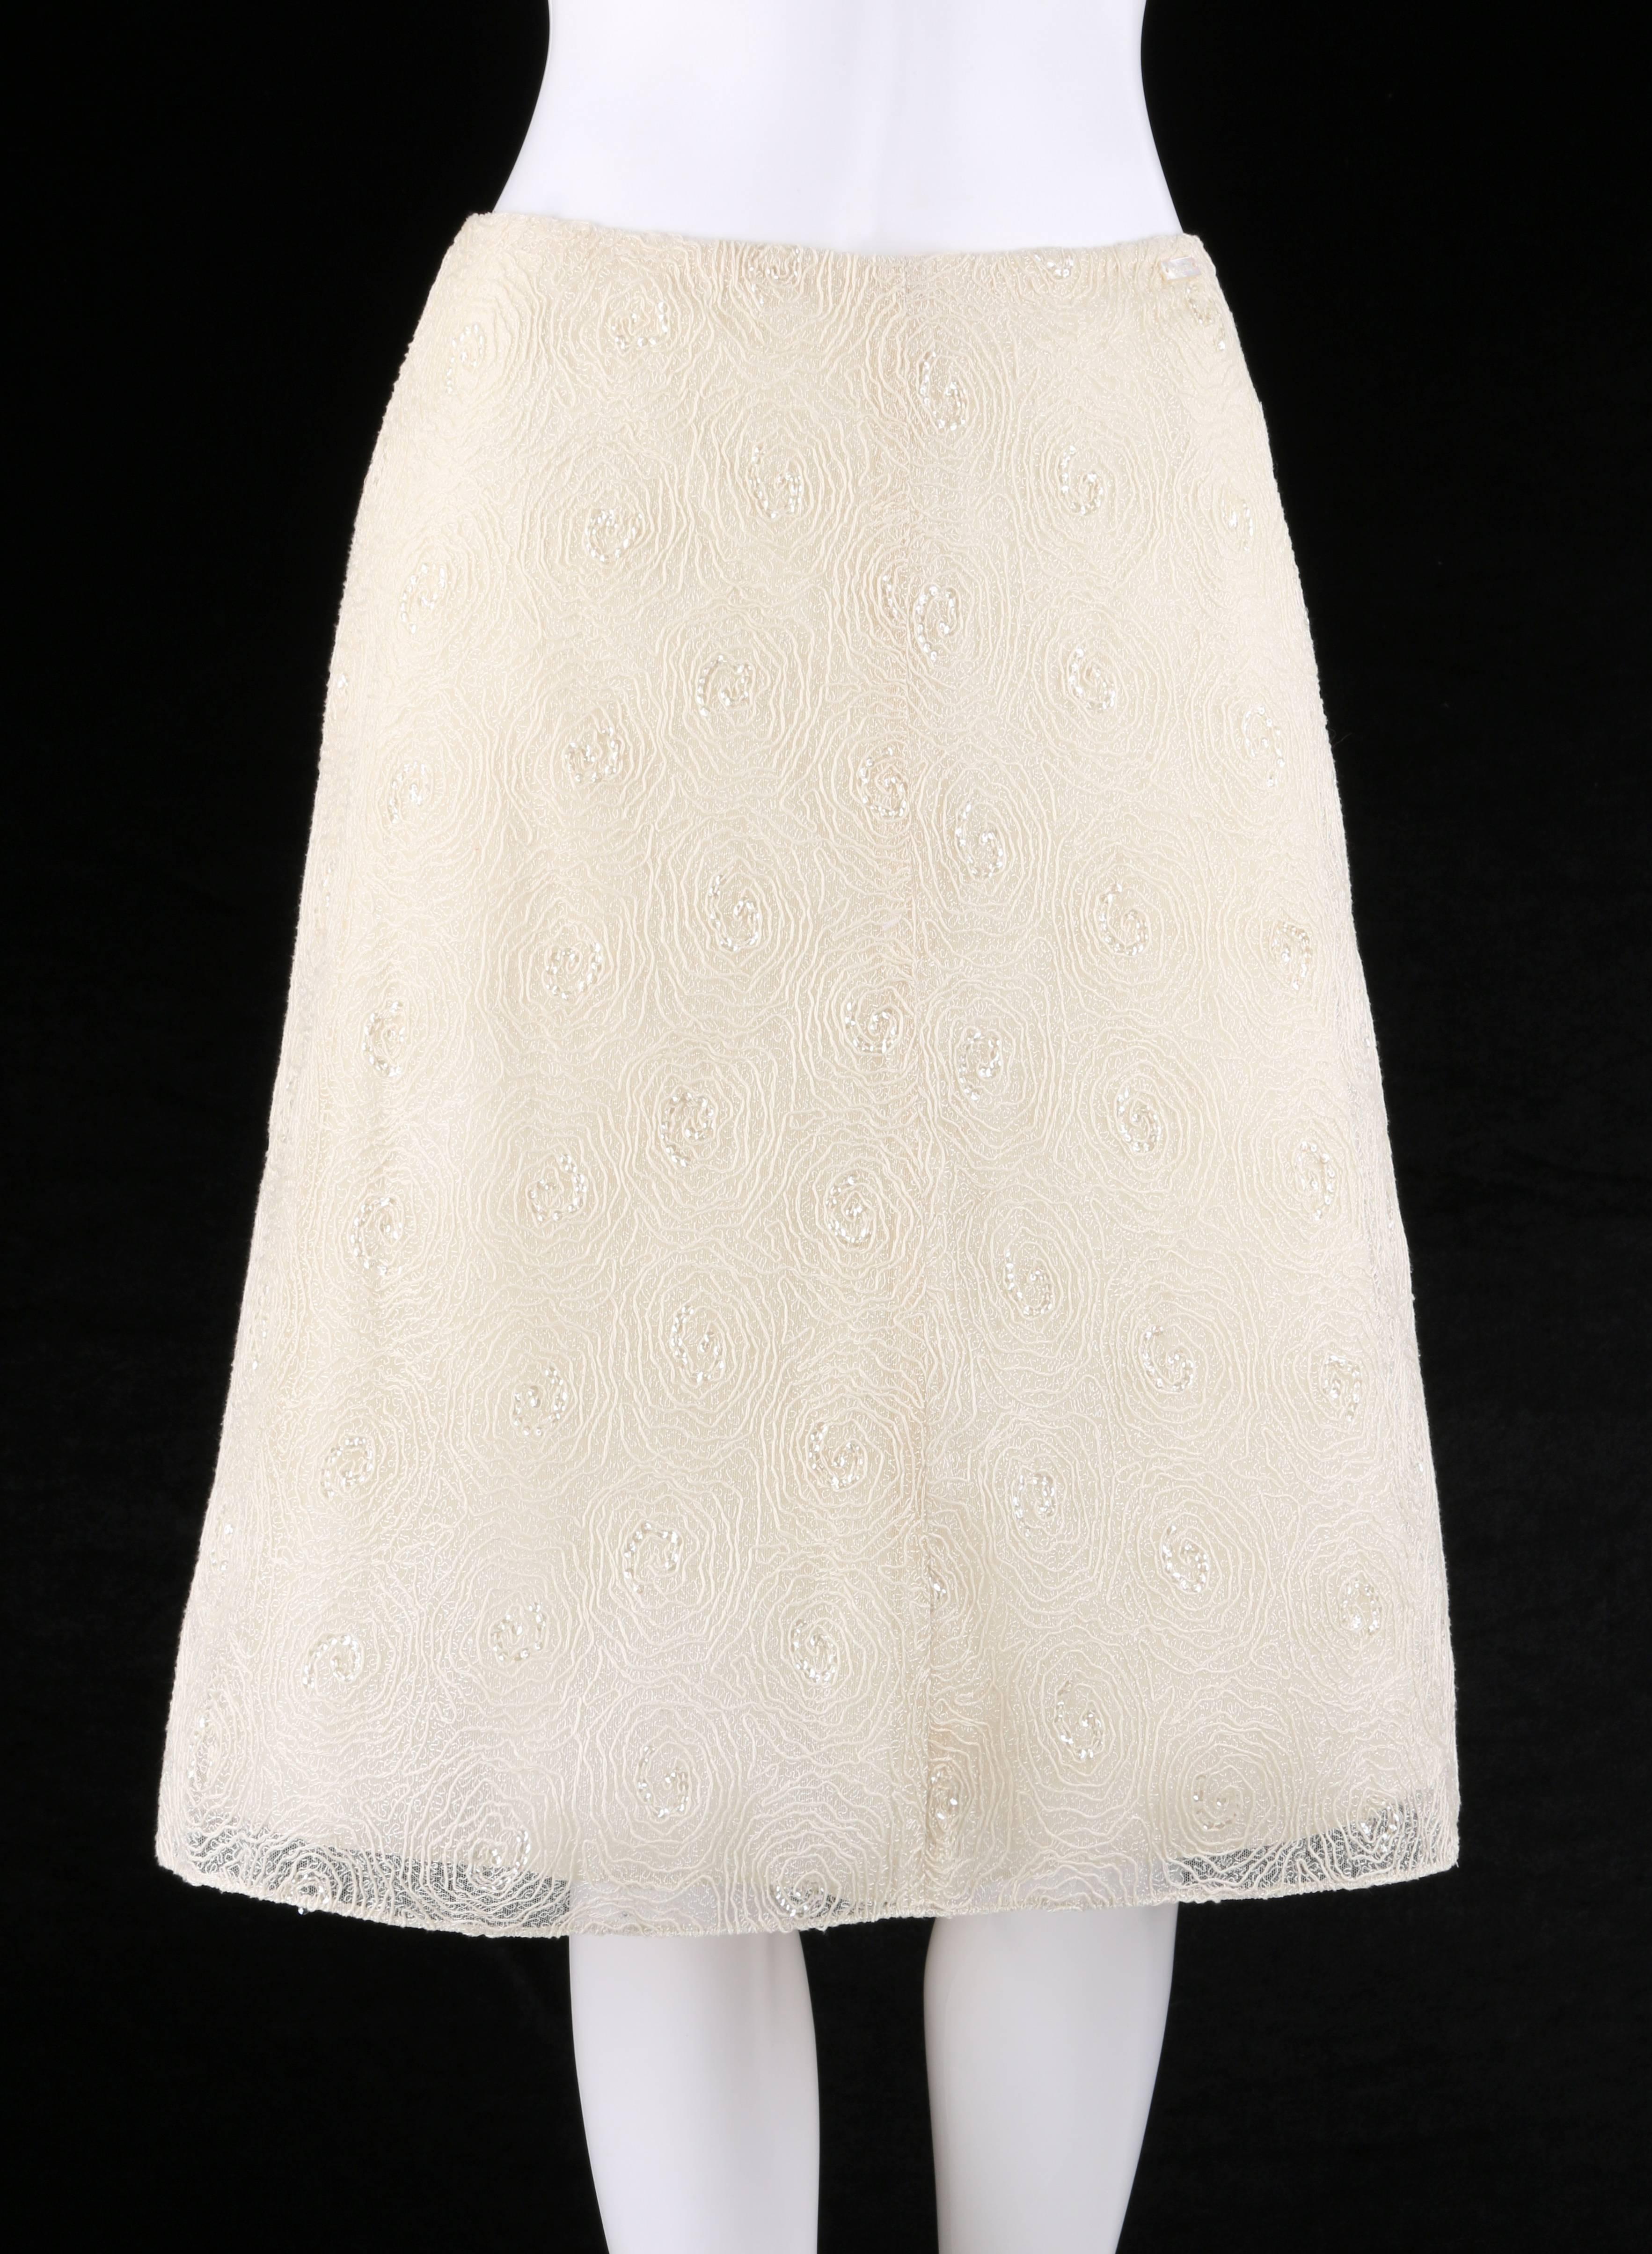 Chanel Spring/Summer 2002 cream floral embroidered sequin embellished tulle skirt designed by Karl Lagerfeld. Swirled floral embroidery over tulle net with clear sequin embellishment at center of flowers. Mother of pearl rectangular 